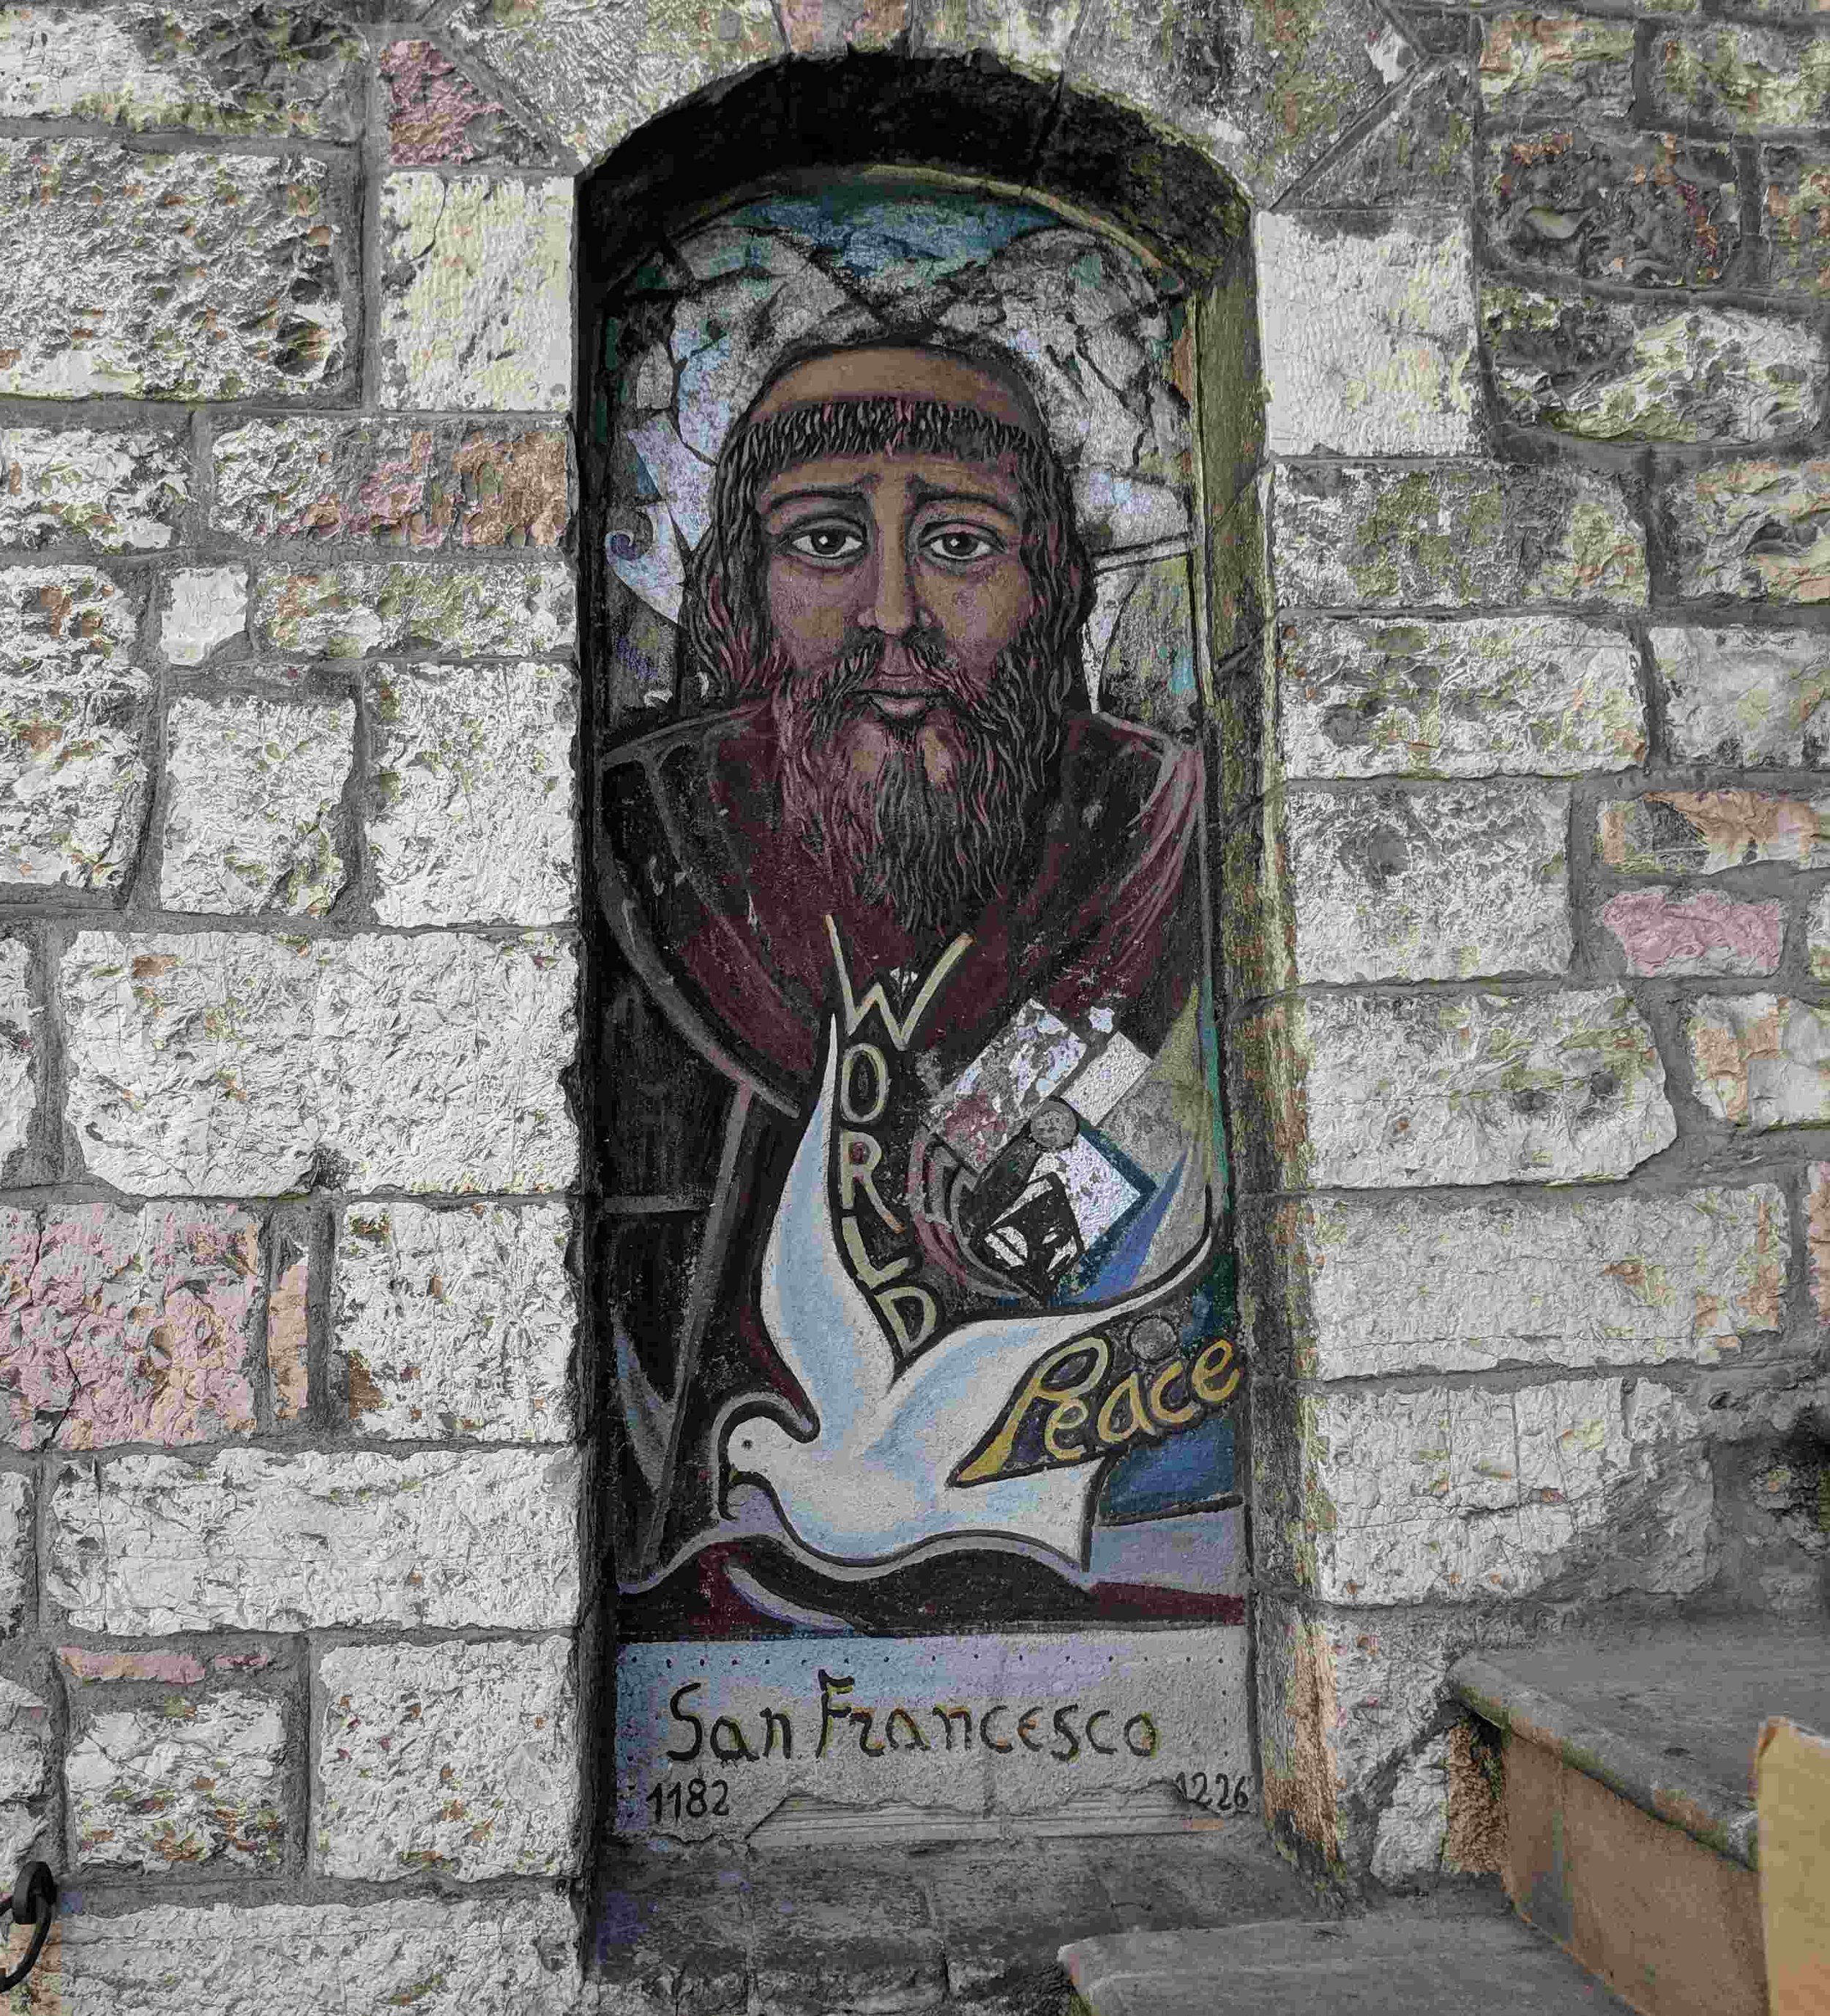 A mural of St. Francis in Assisi